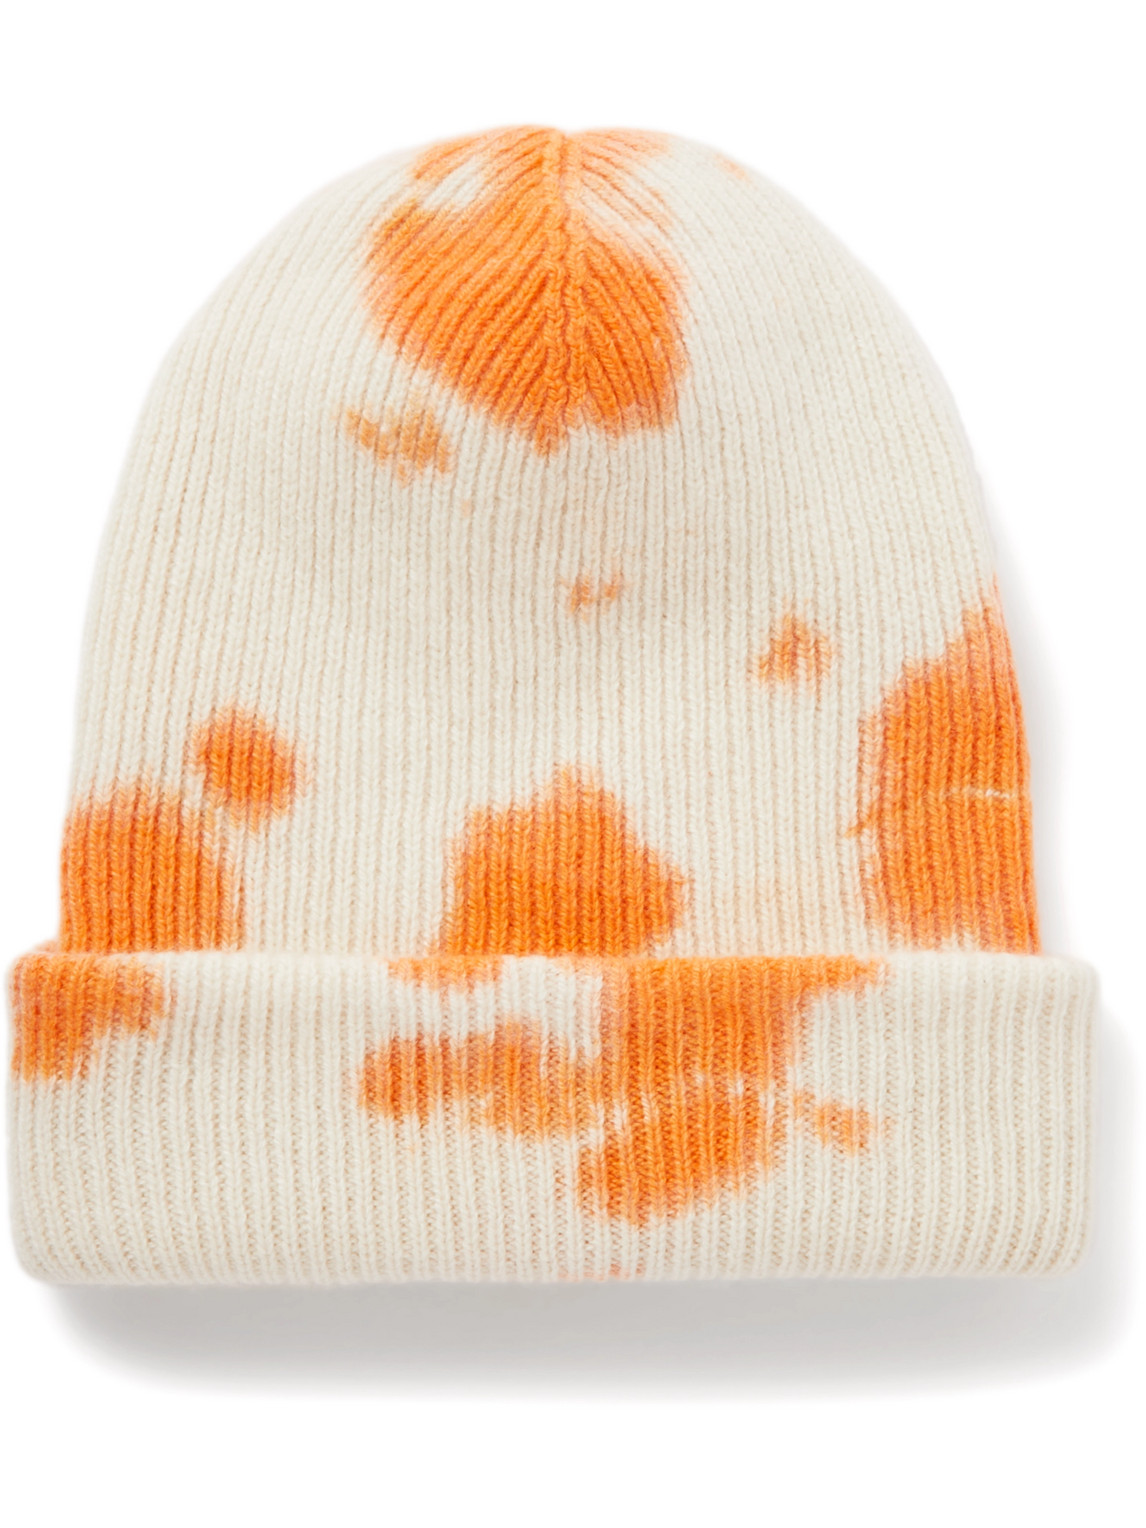 THE ELDER STATESMAN TIE-DYED RIBBED CASHMERE BEANIE